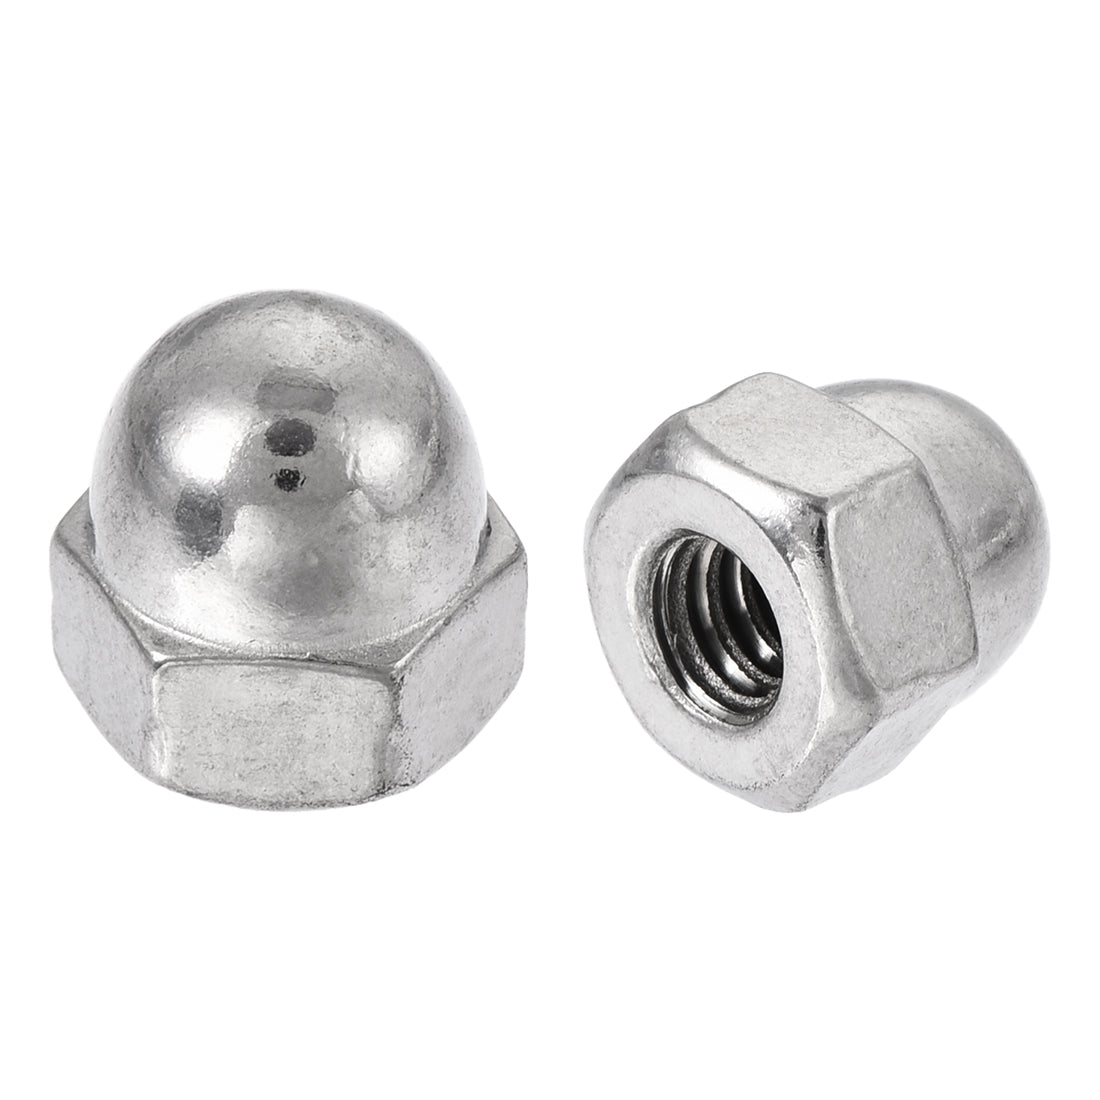 uxcell Uxcell 10#-24 Dome Head 316 Stainless Steel Cap Acorn Hex Nuts 20pcs